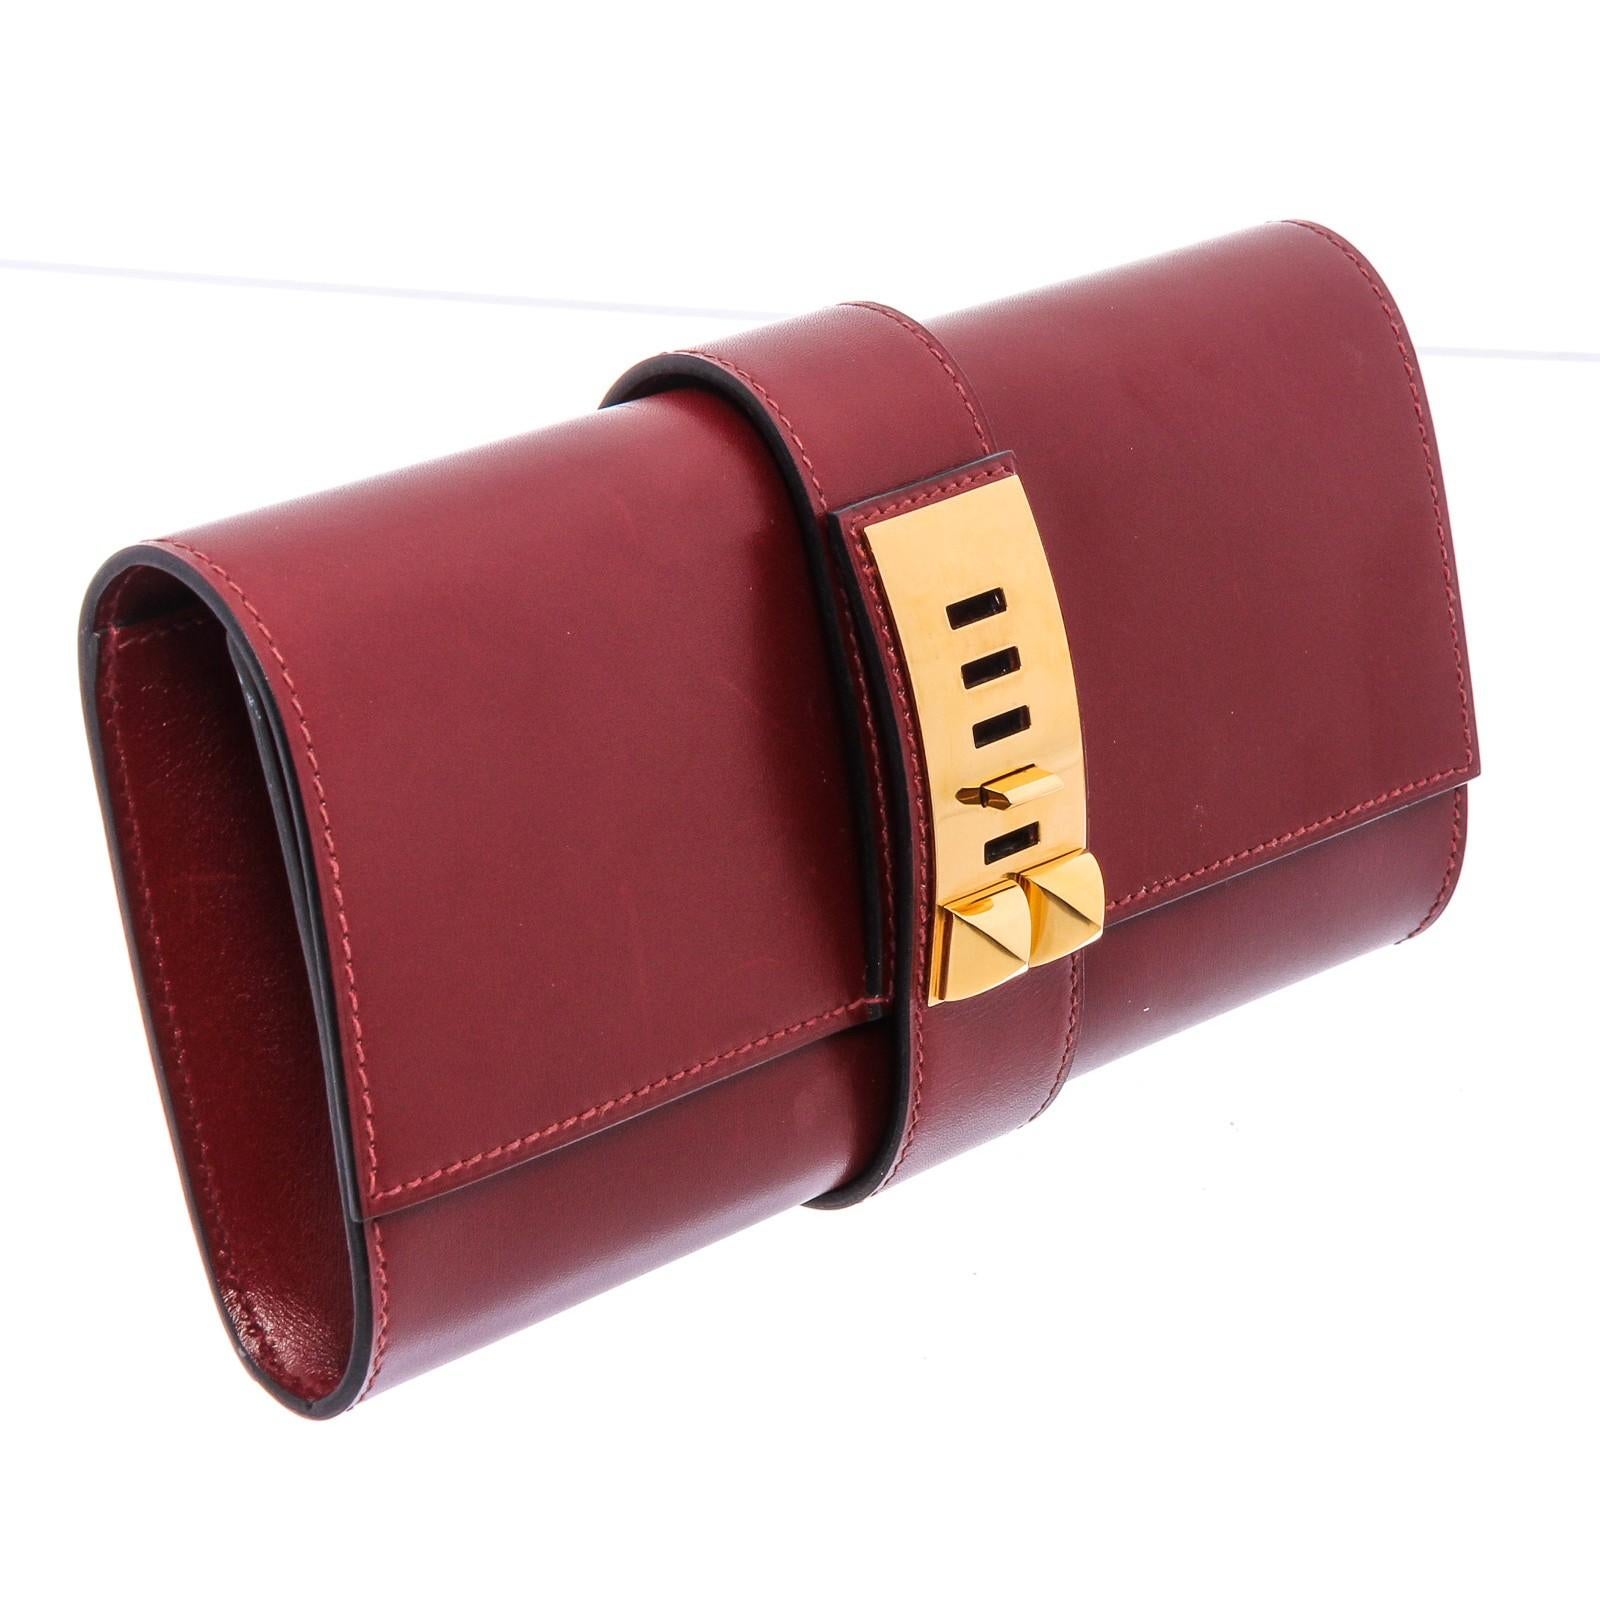 Red Box leather Hermès Medor 23 clutch with gold-plated hardware, tonal leather interior, single interior slit pocket and belted slide-lock closure at exterior. 20534MSC.